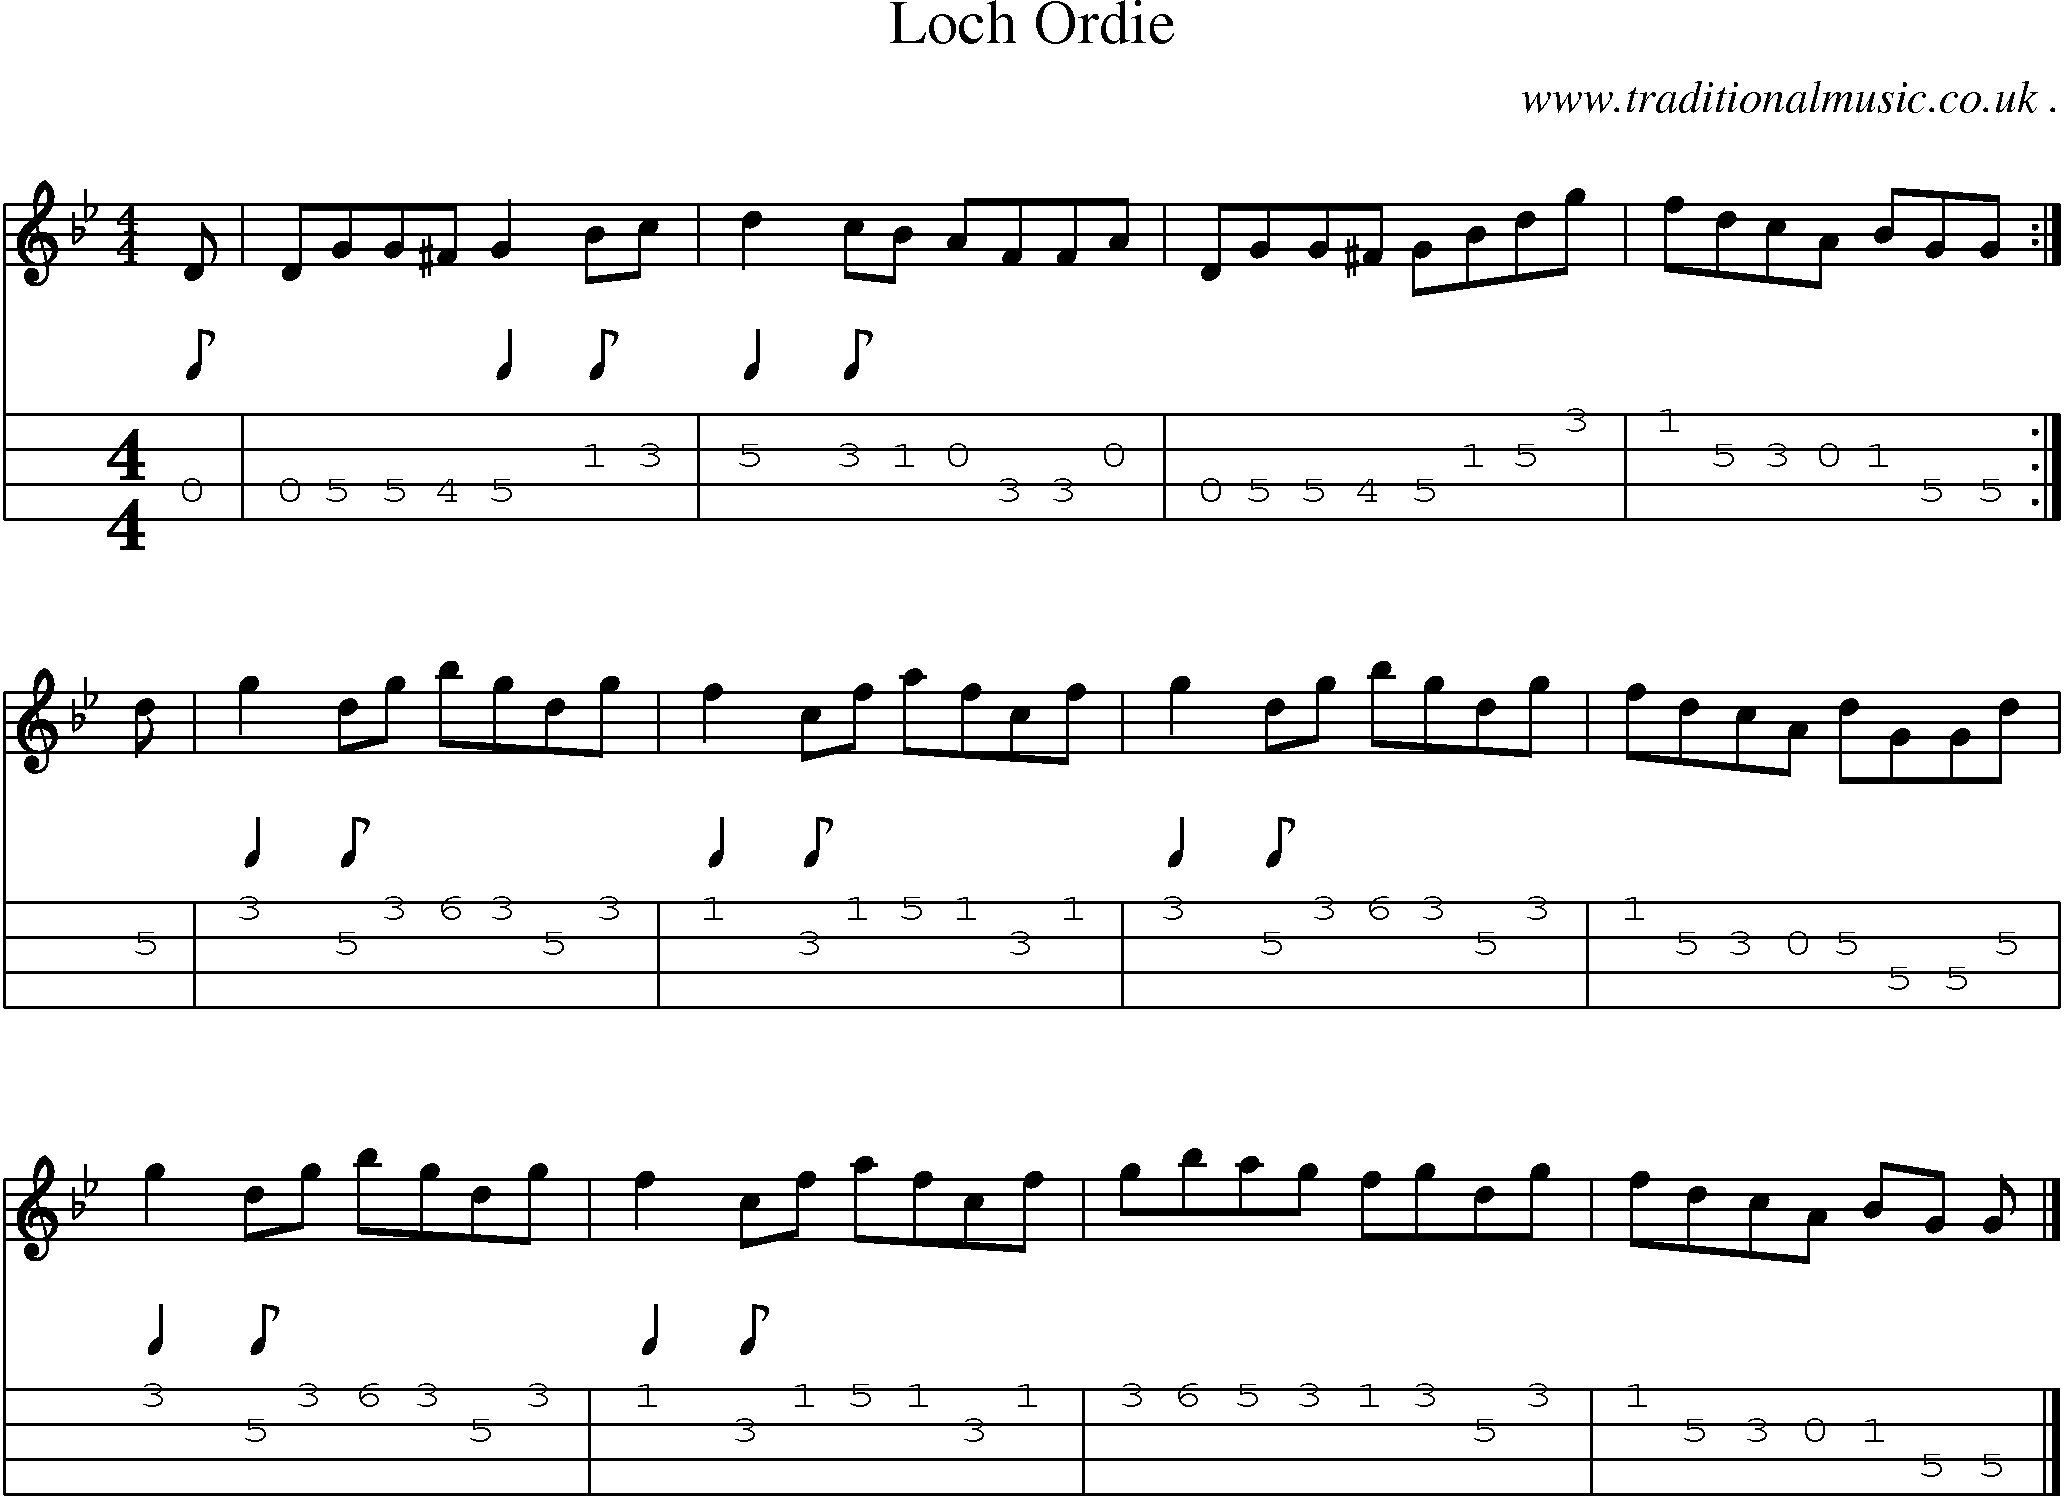 Sheet-music  score, Chords and Mandolin Tabs for Loch Ordie